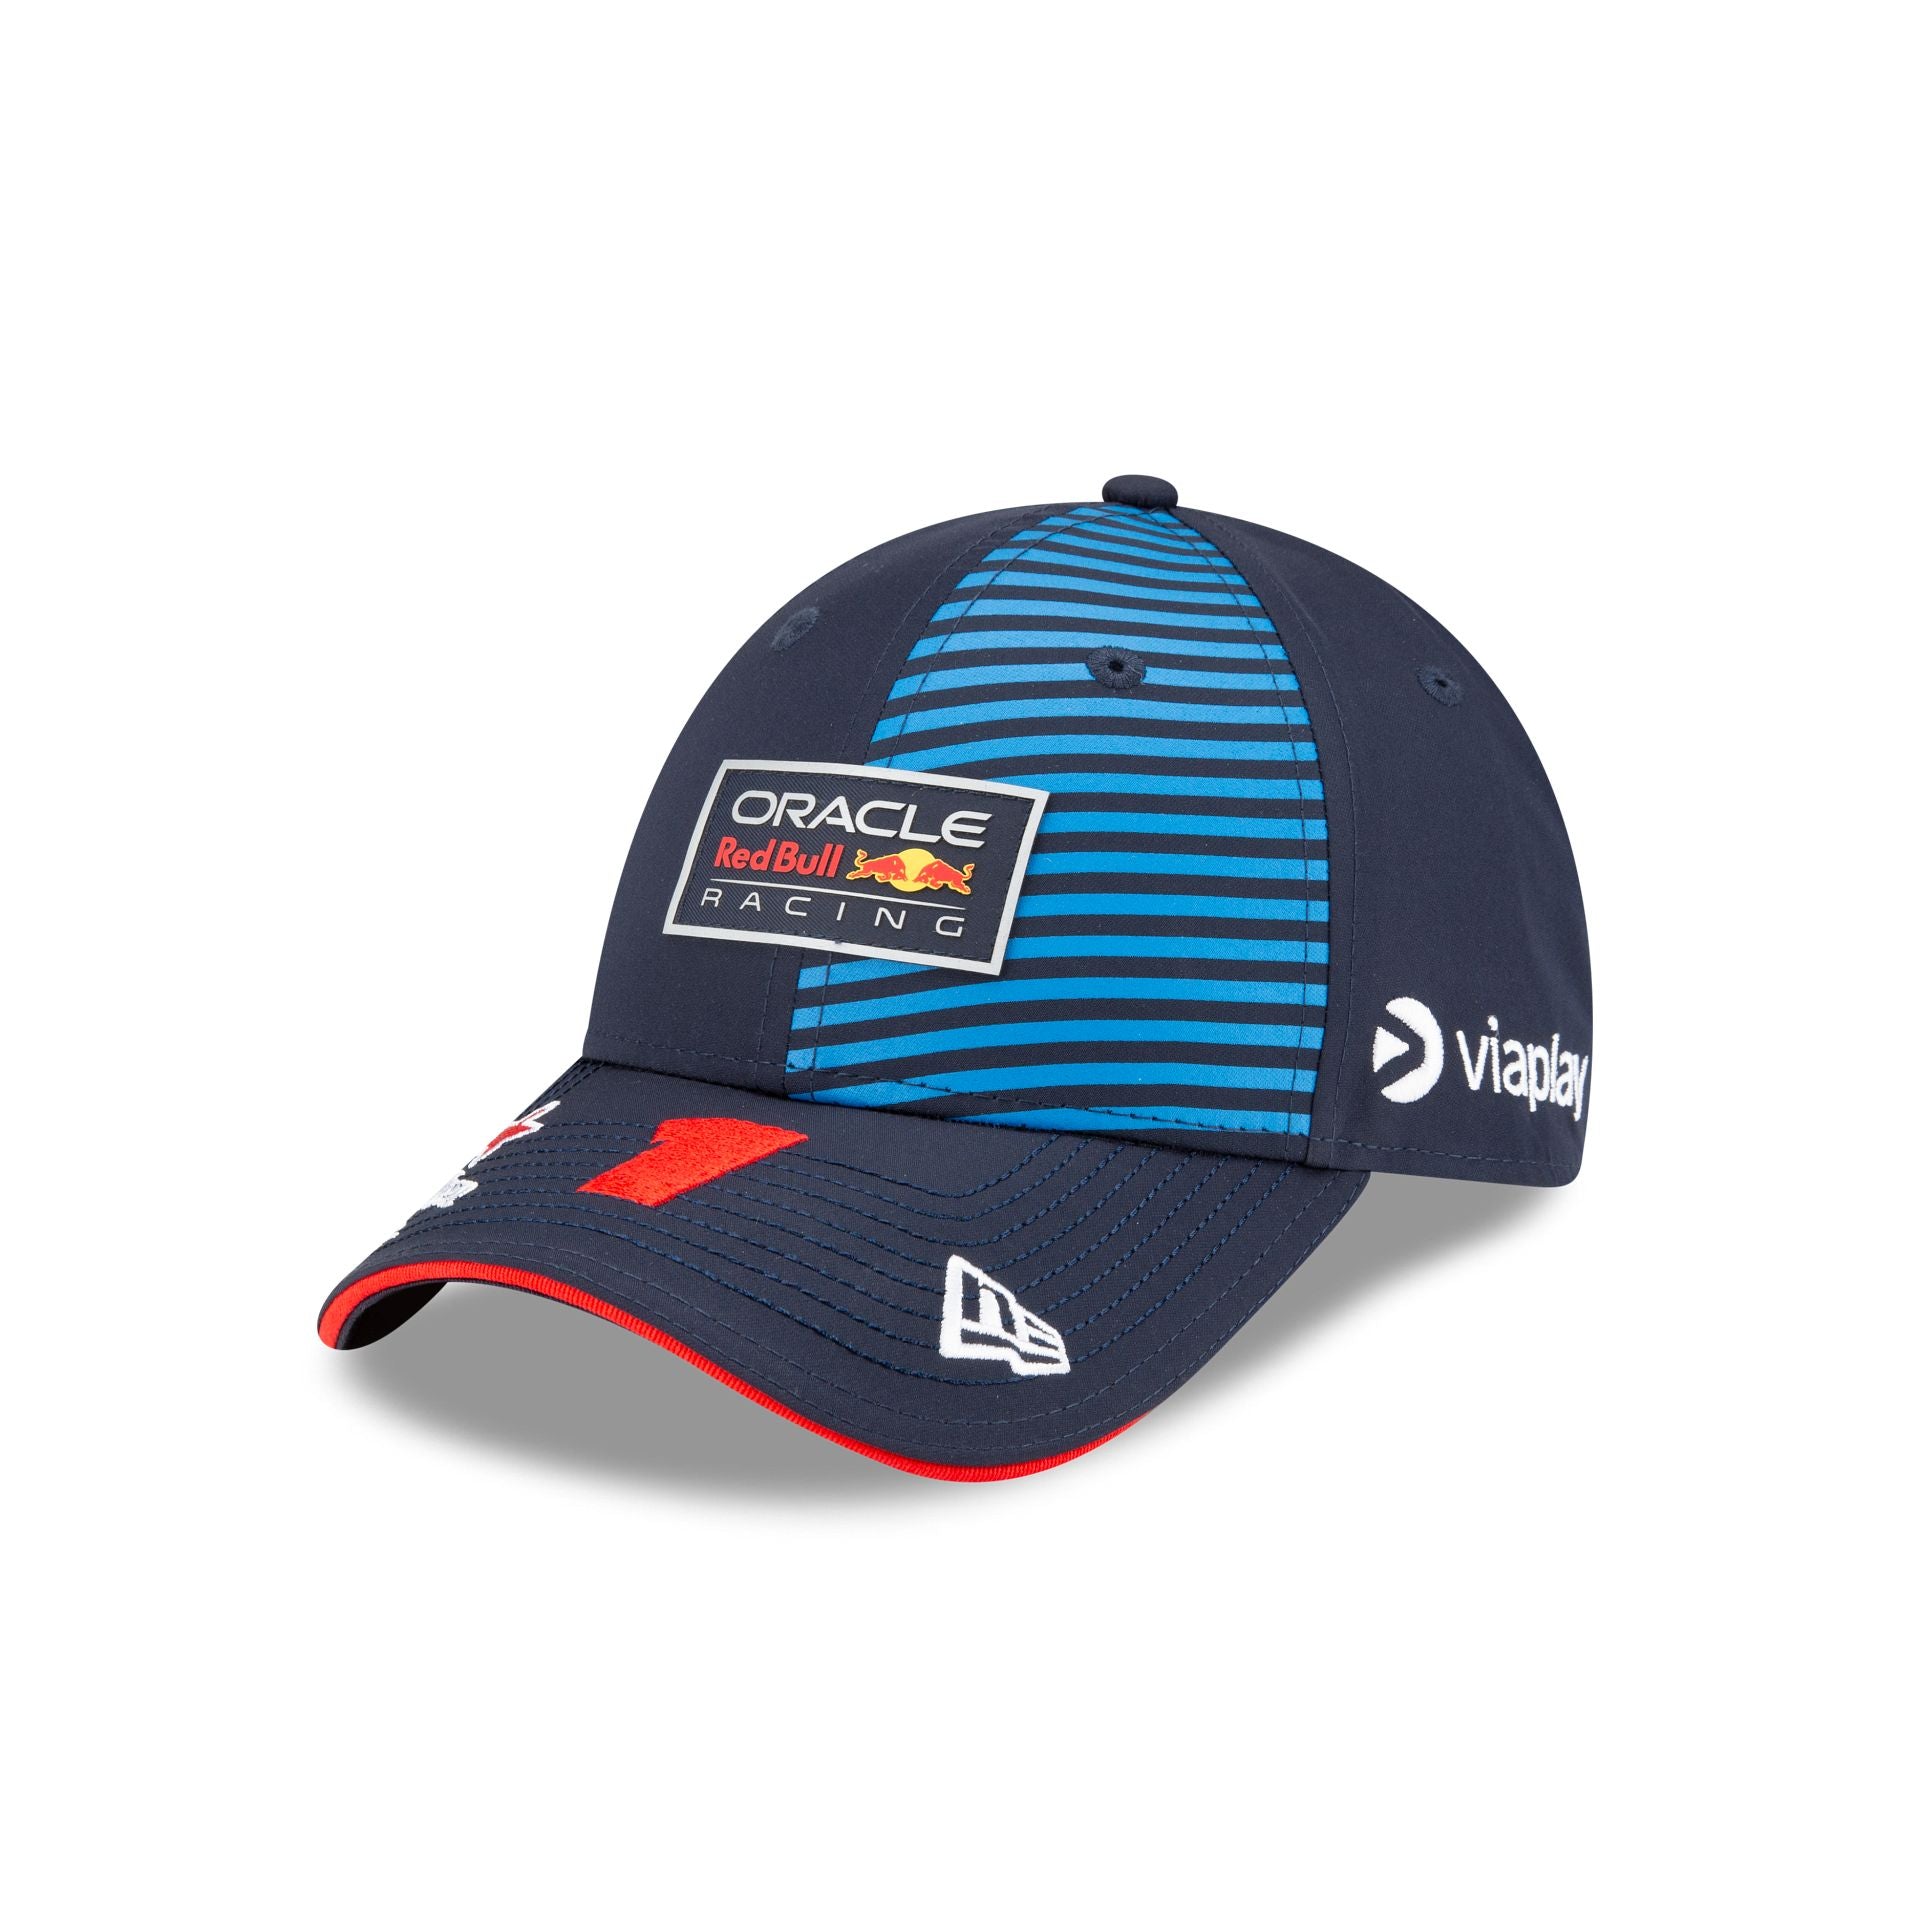 Oracle Red Bull Racing Max Verstappen Champion 9FIFTY Original Fit 